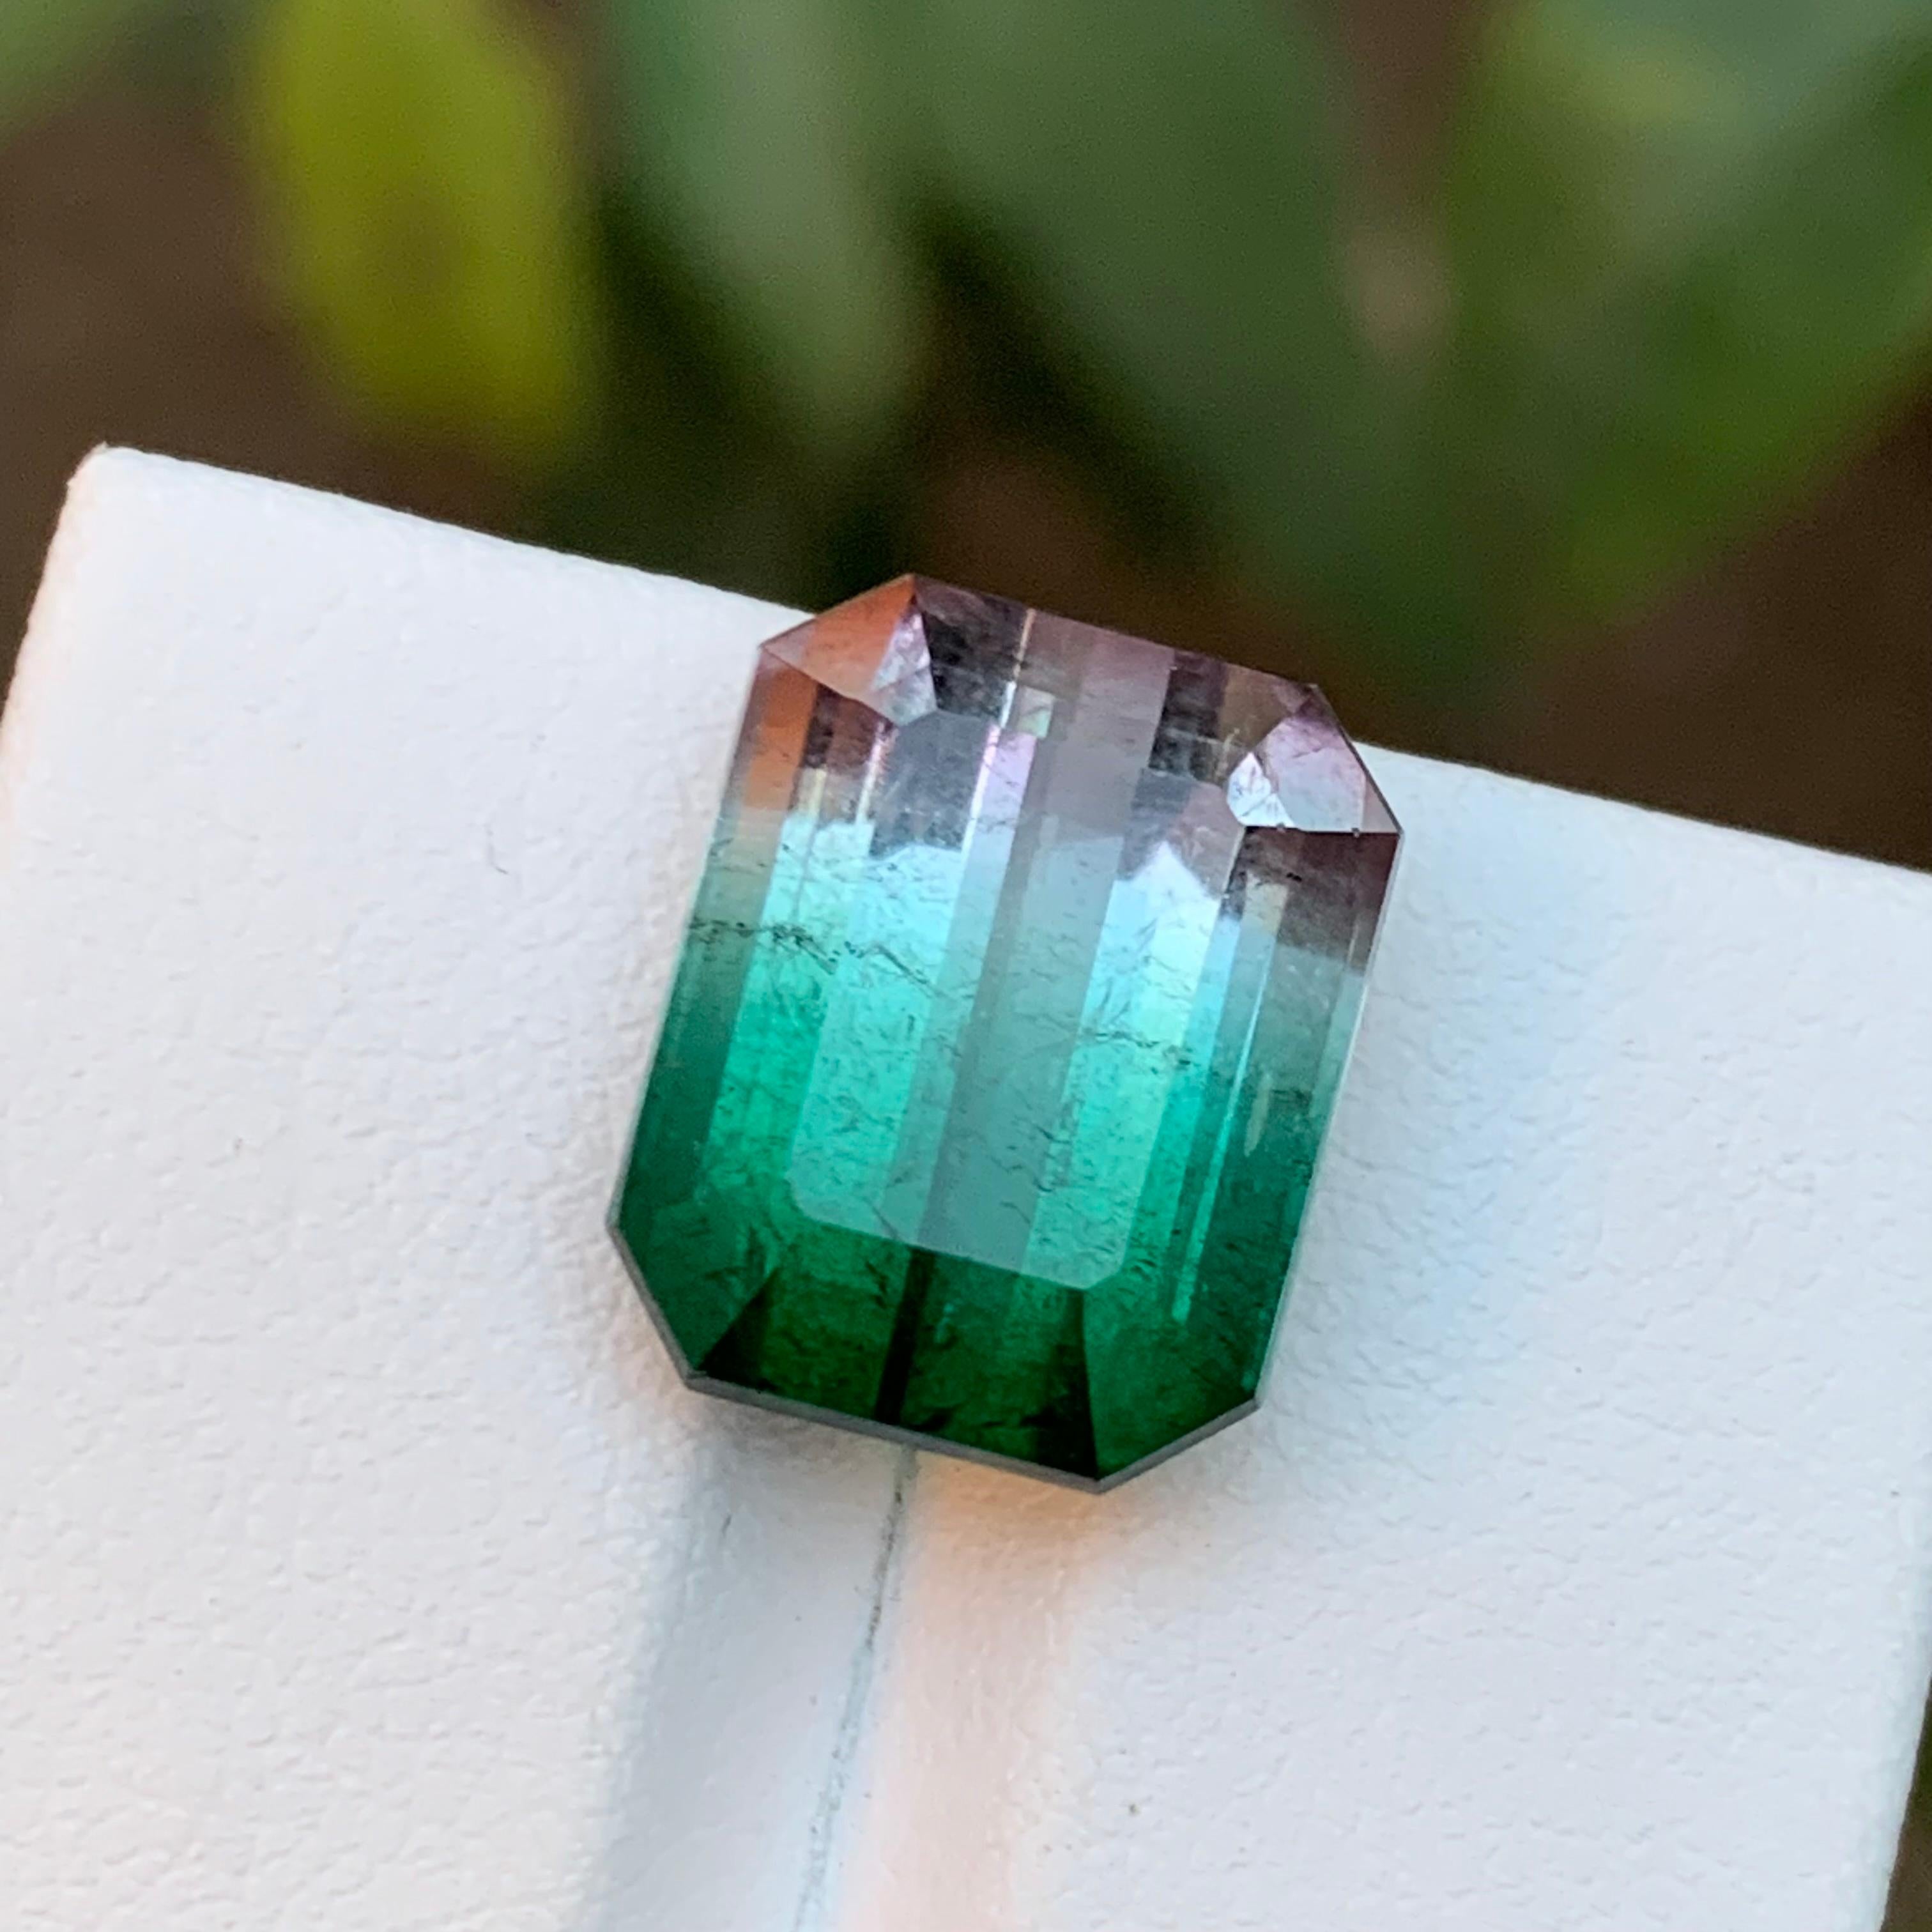 GEMSTONE TYPE: Tourmaline
PIECE(S): 1
WEIGHT: 13.15 Carat
SHAPE: Emerald
SIZE (MM): 14.20 x 11.30 x 9.12
COLOR: Watermelon Bicolor Bluish Green & Pink
CLARITY: Slightly Included 
TREATMENT: Heated
ORIGIN: Afghanistan
CERTIFICATE: On